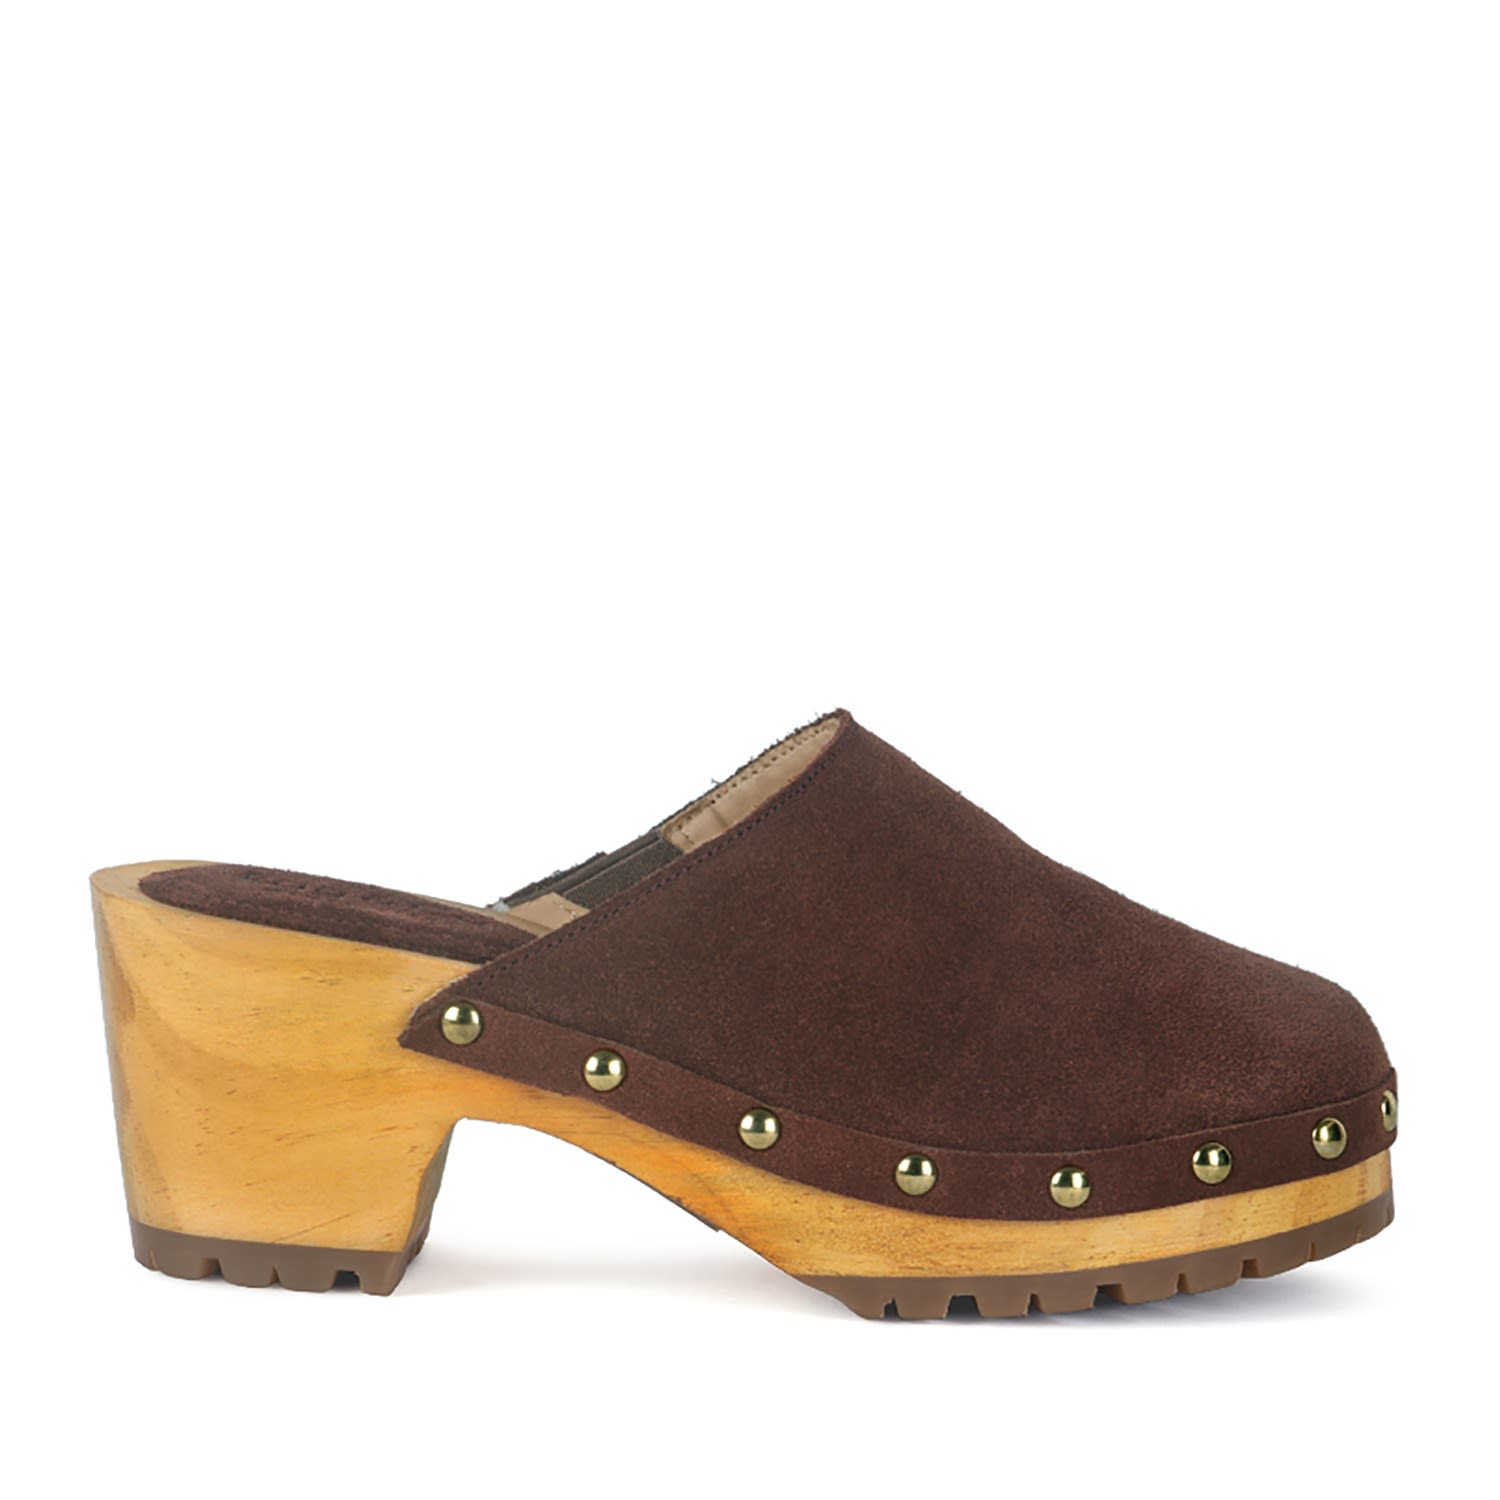 Women’s Cedrus Fine Suede Studded Clog Mules Brown 7 Uk Rag & Co.